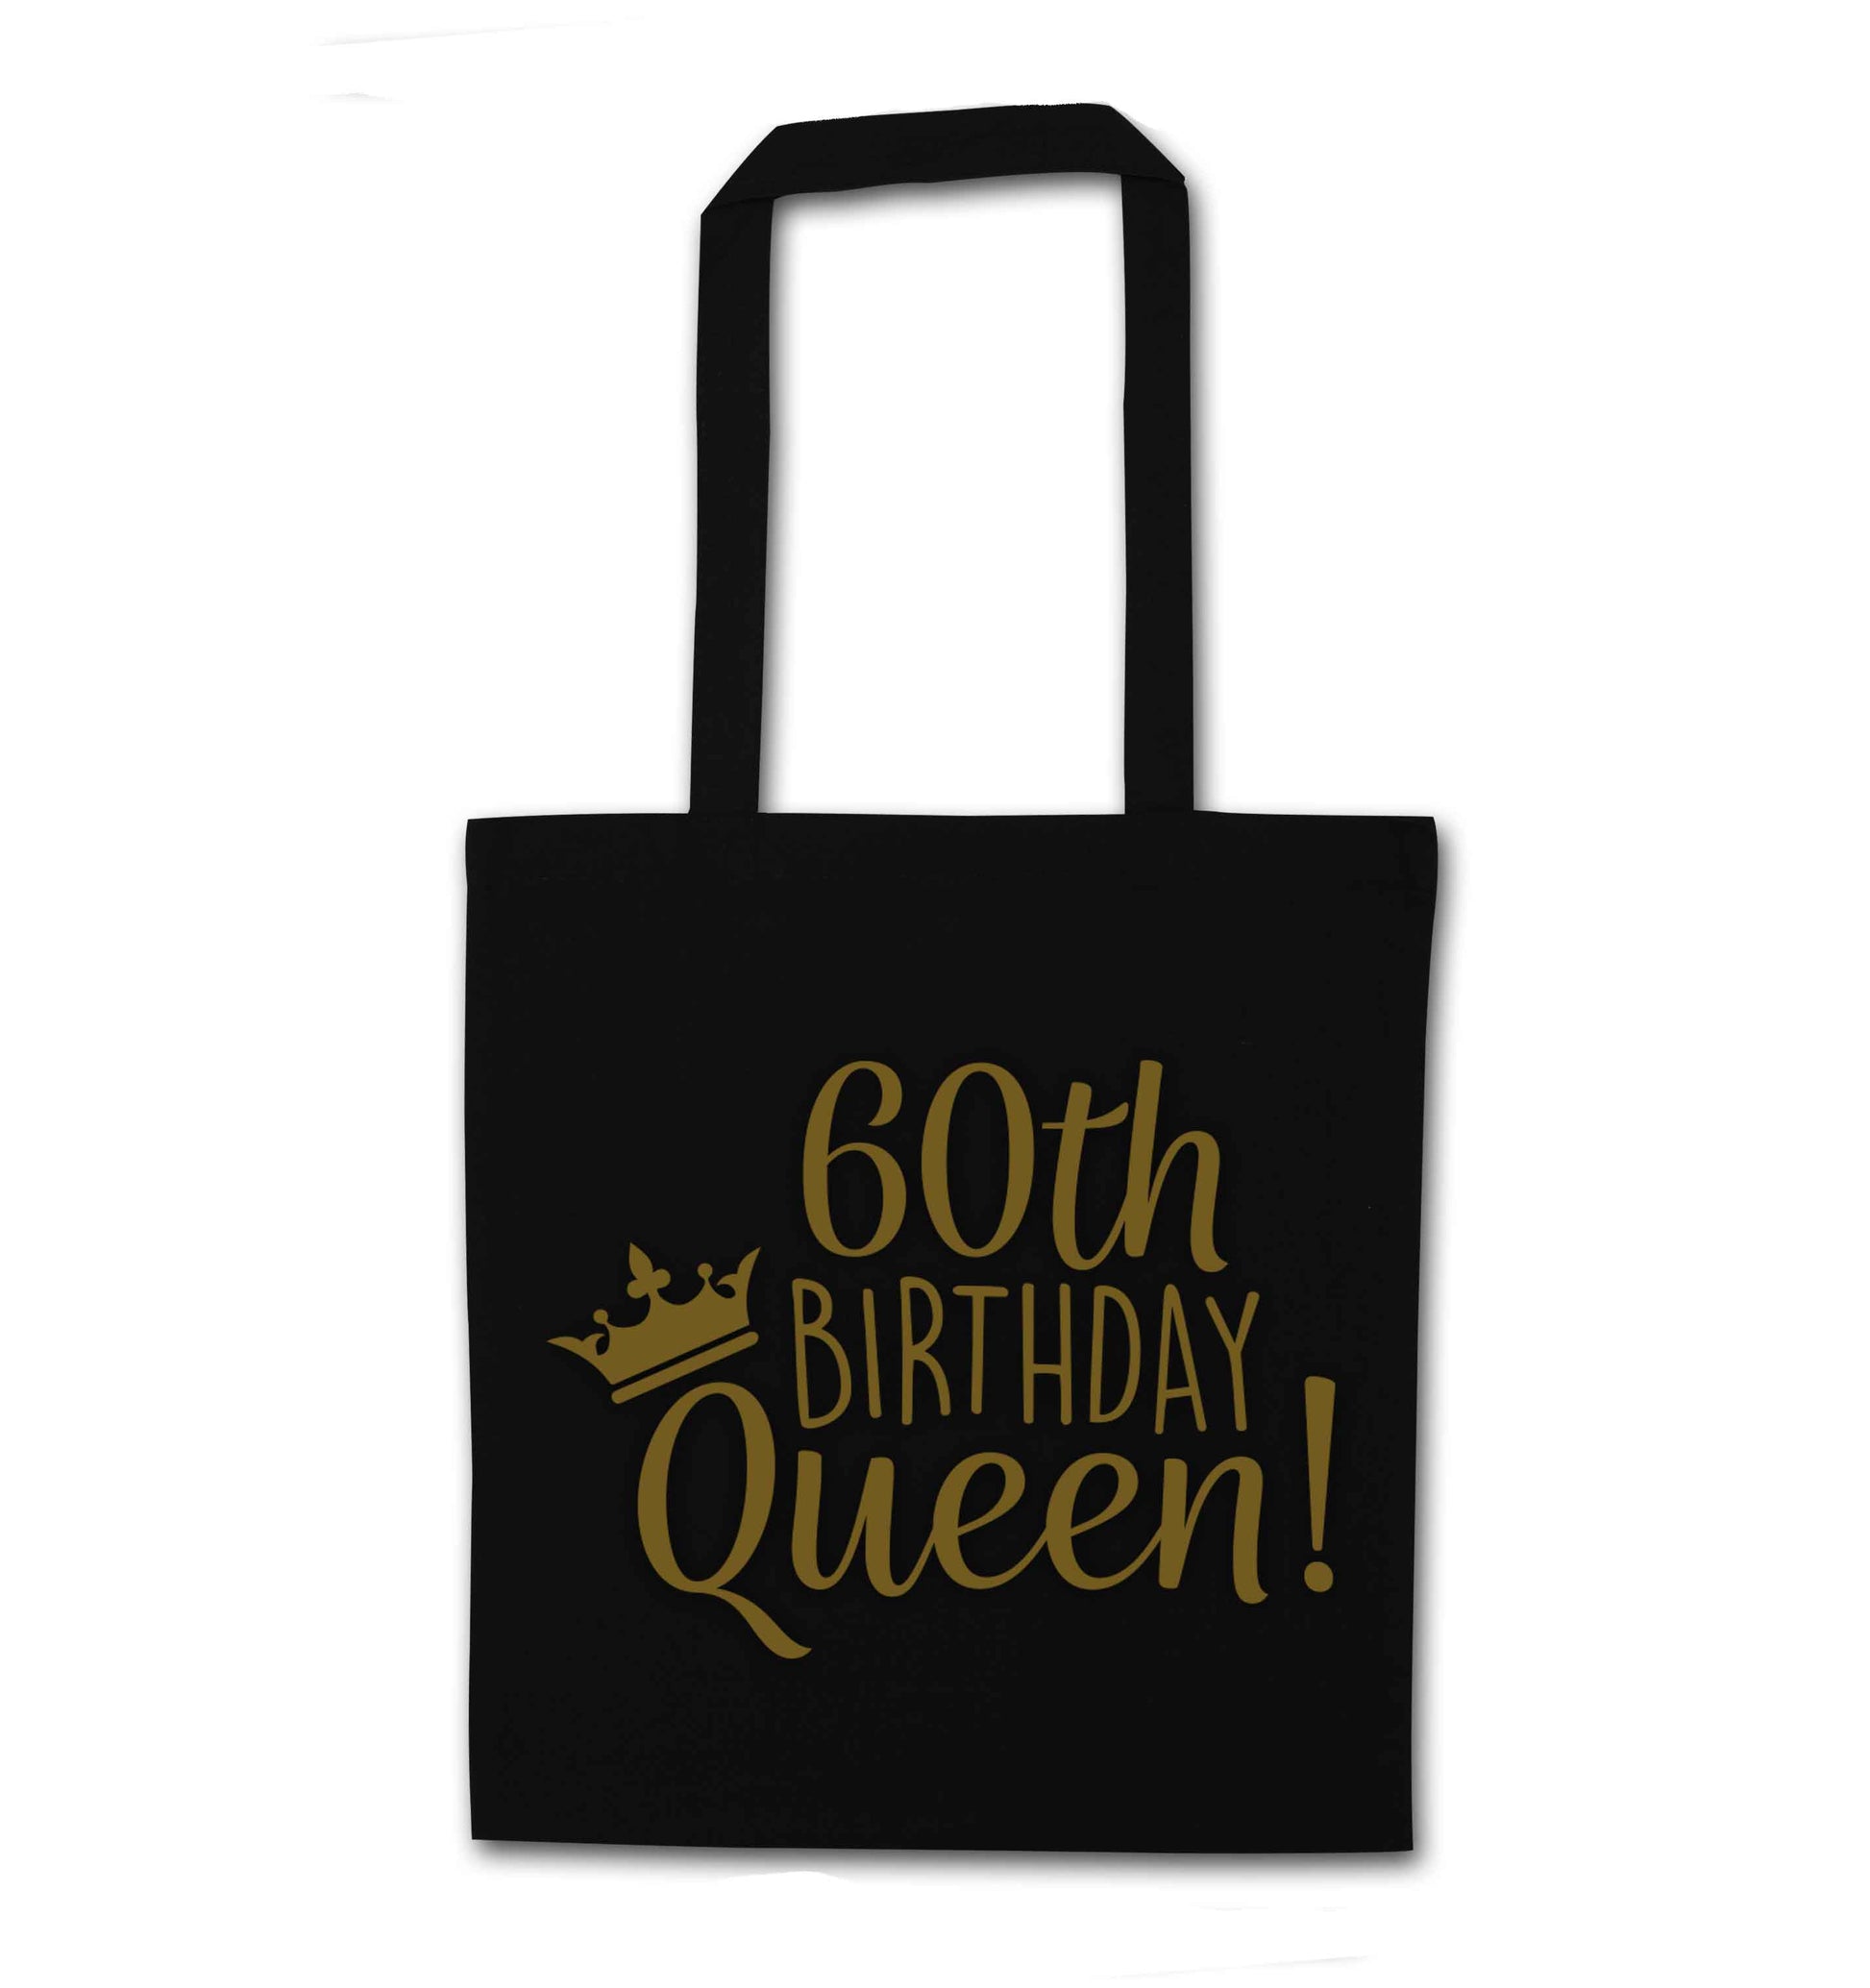 60th birthday Queen black tote bag